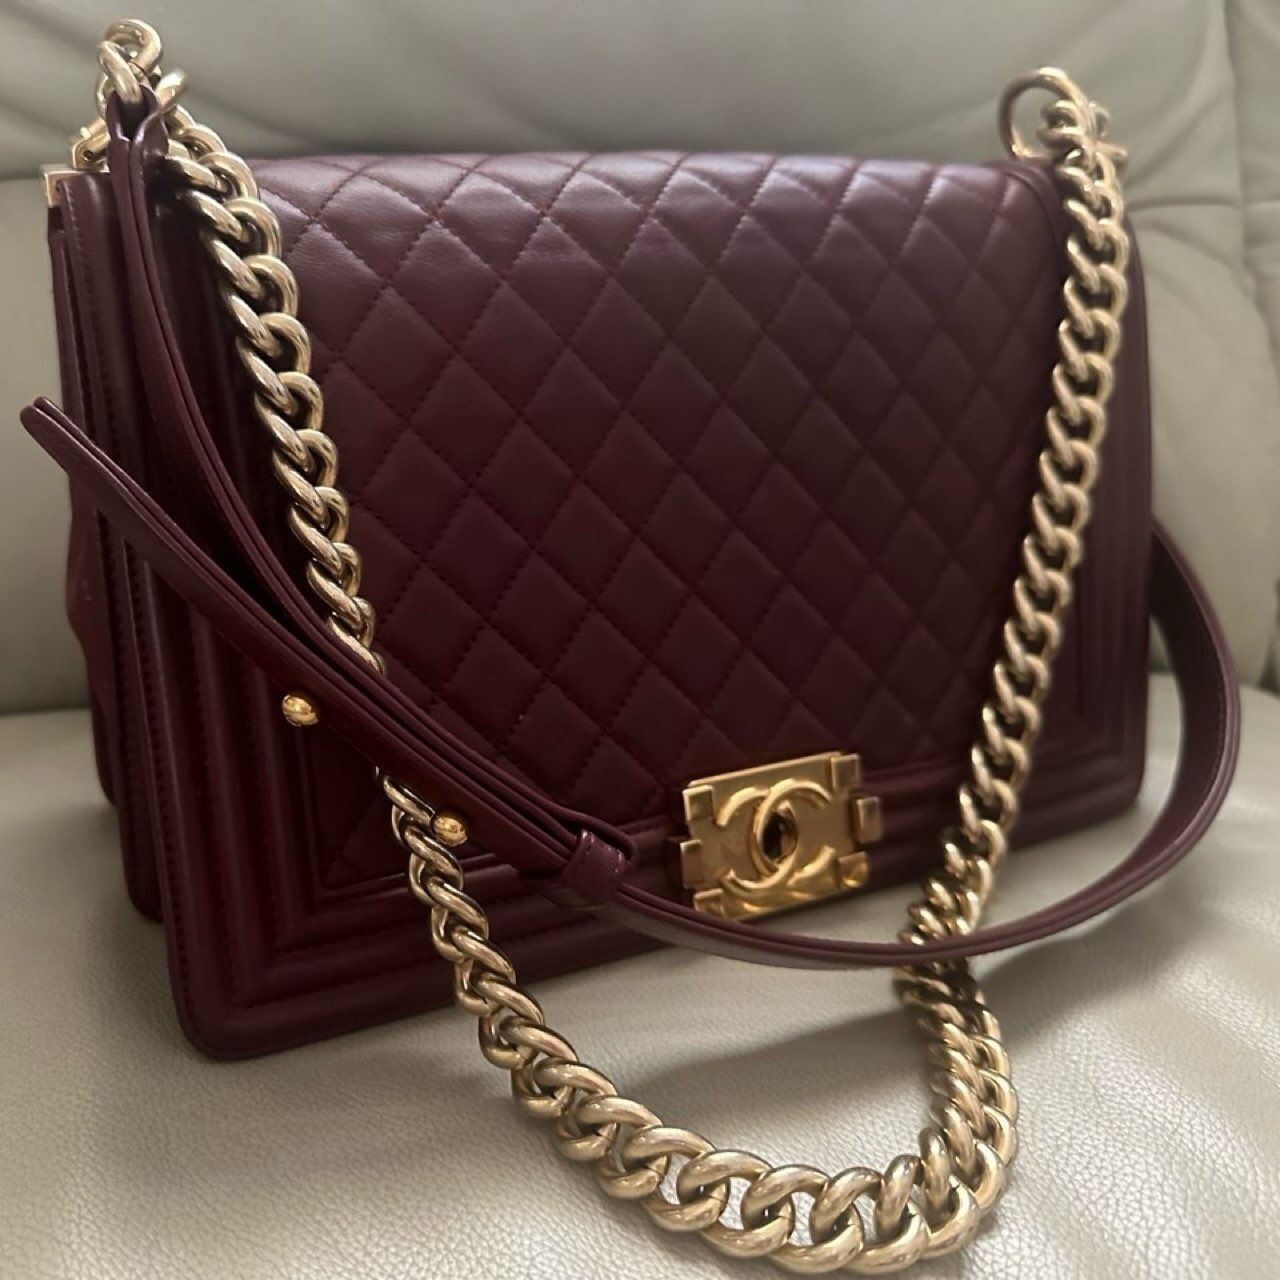 Chanel Boy New Medium Red Maroon Quilted GHW Shoulder Bag